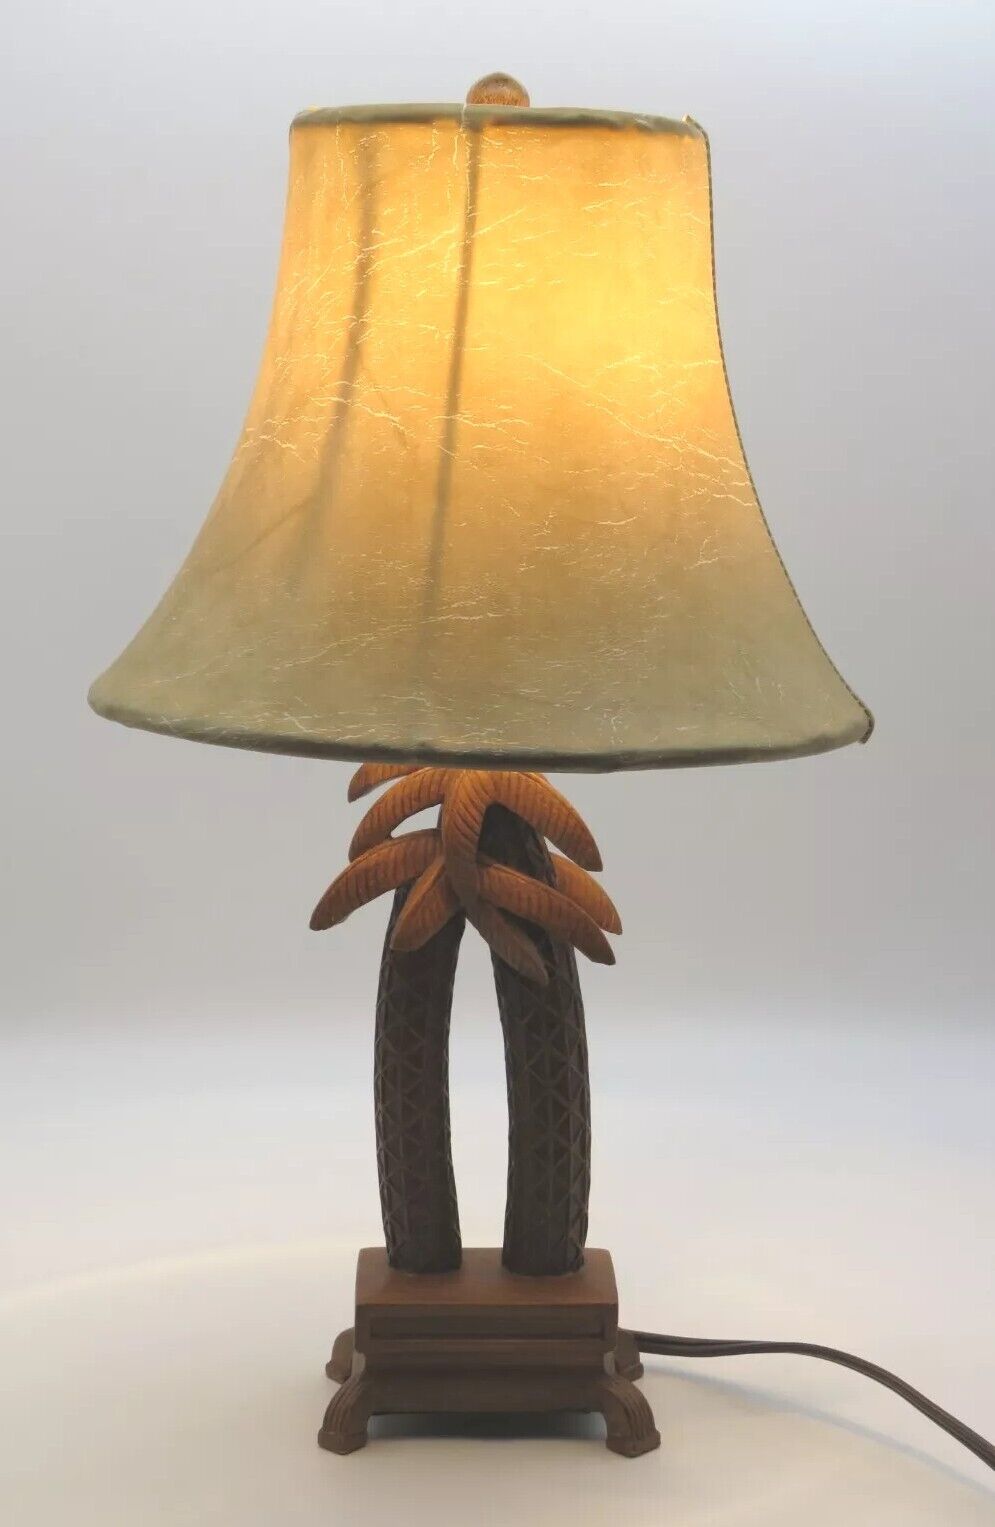 Vintage Cheyenne Double Palm Tree Table Desk Lamp 16” Resin Faux Leather Shade